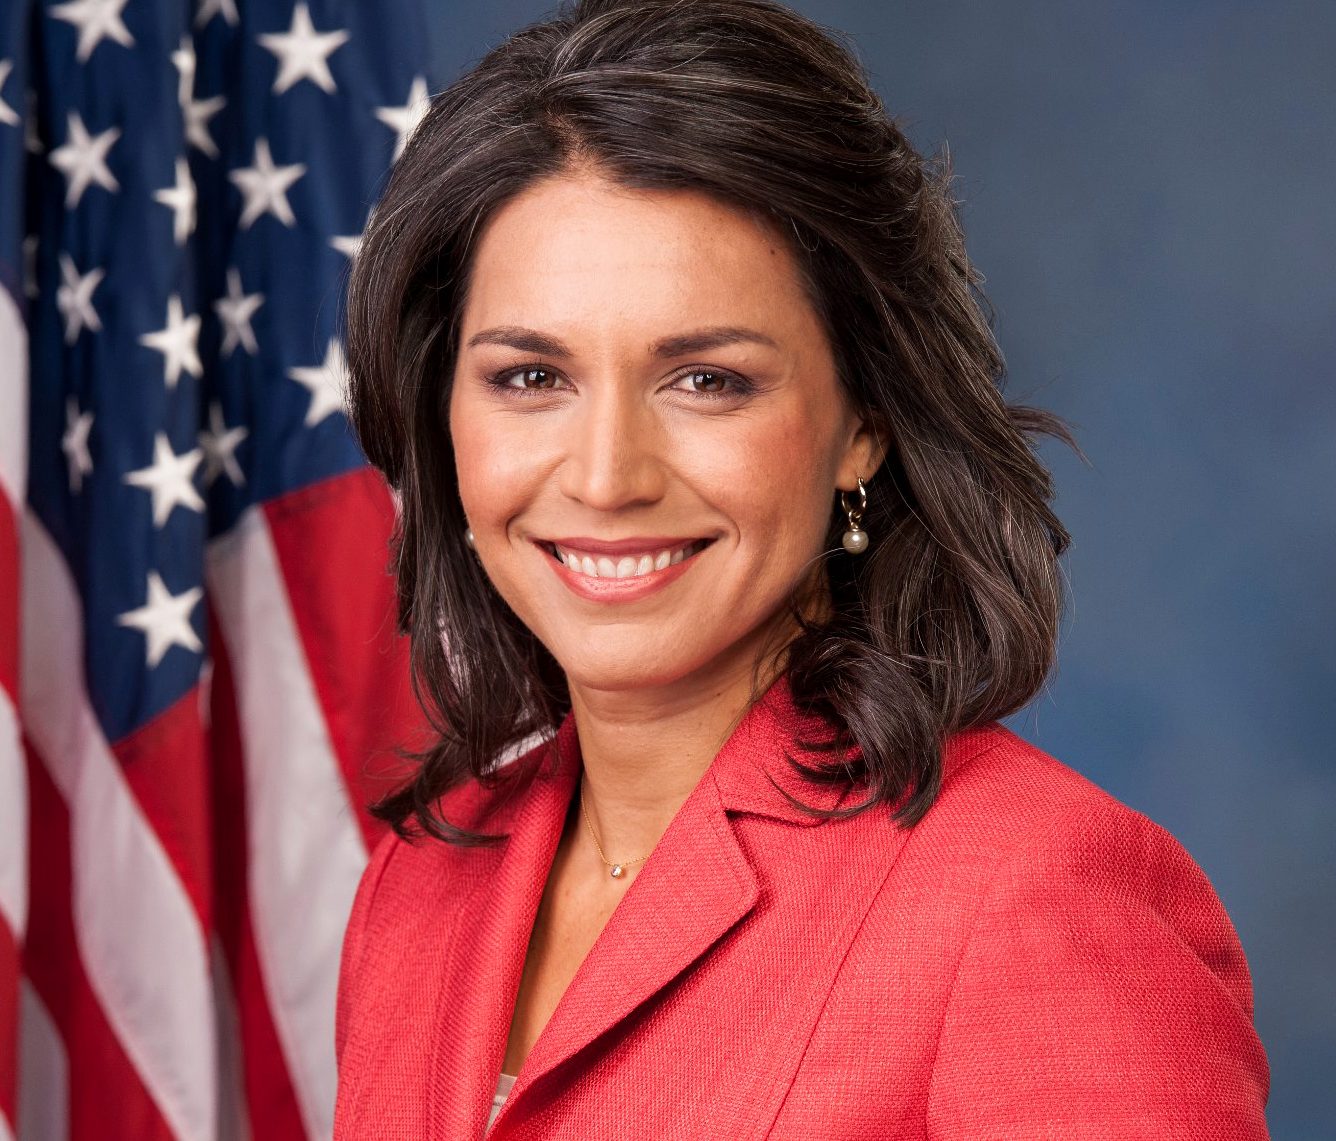 NBC News, to Claim Russia Supports Tulsi Gabbard, Relies on Firm Just Caught Fabricating Russia Data for the Democratic Party